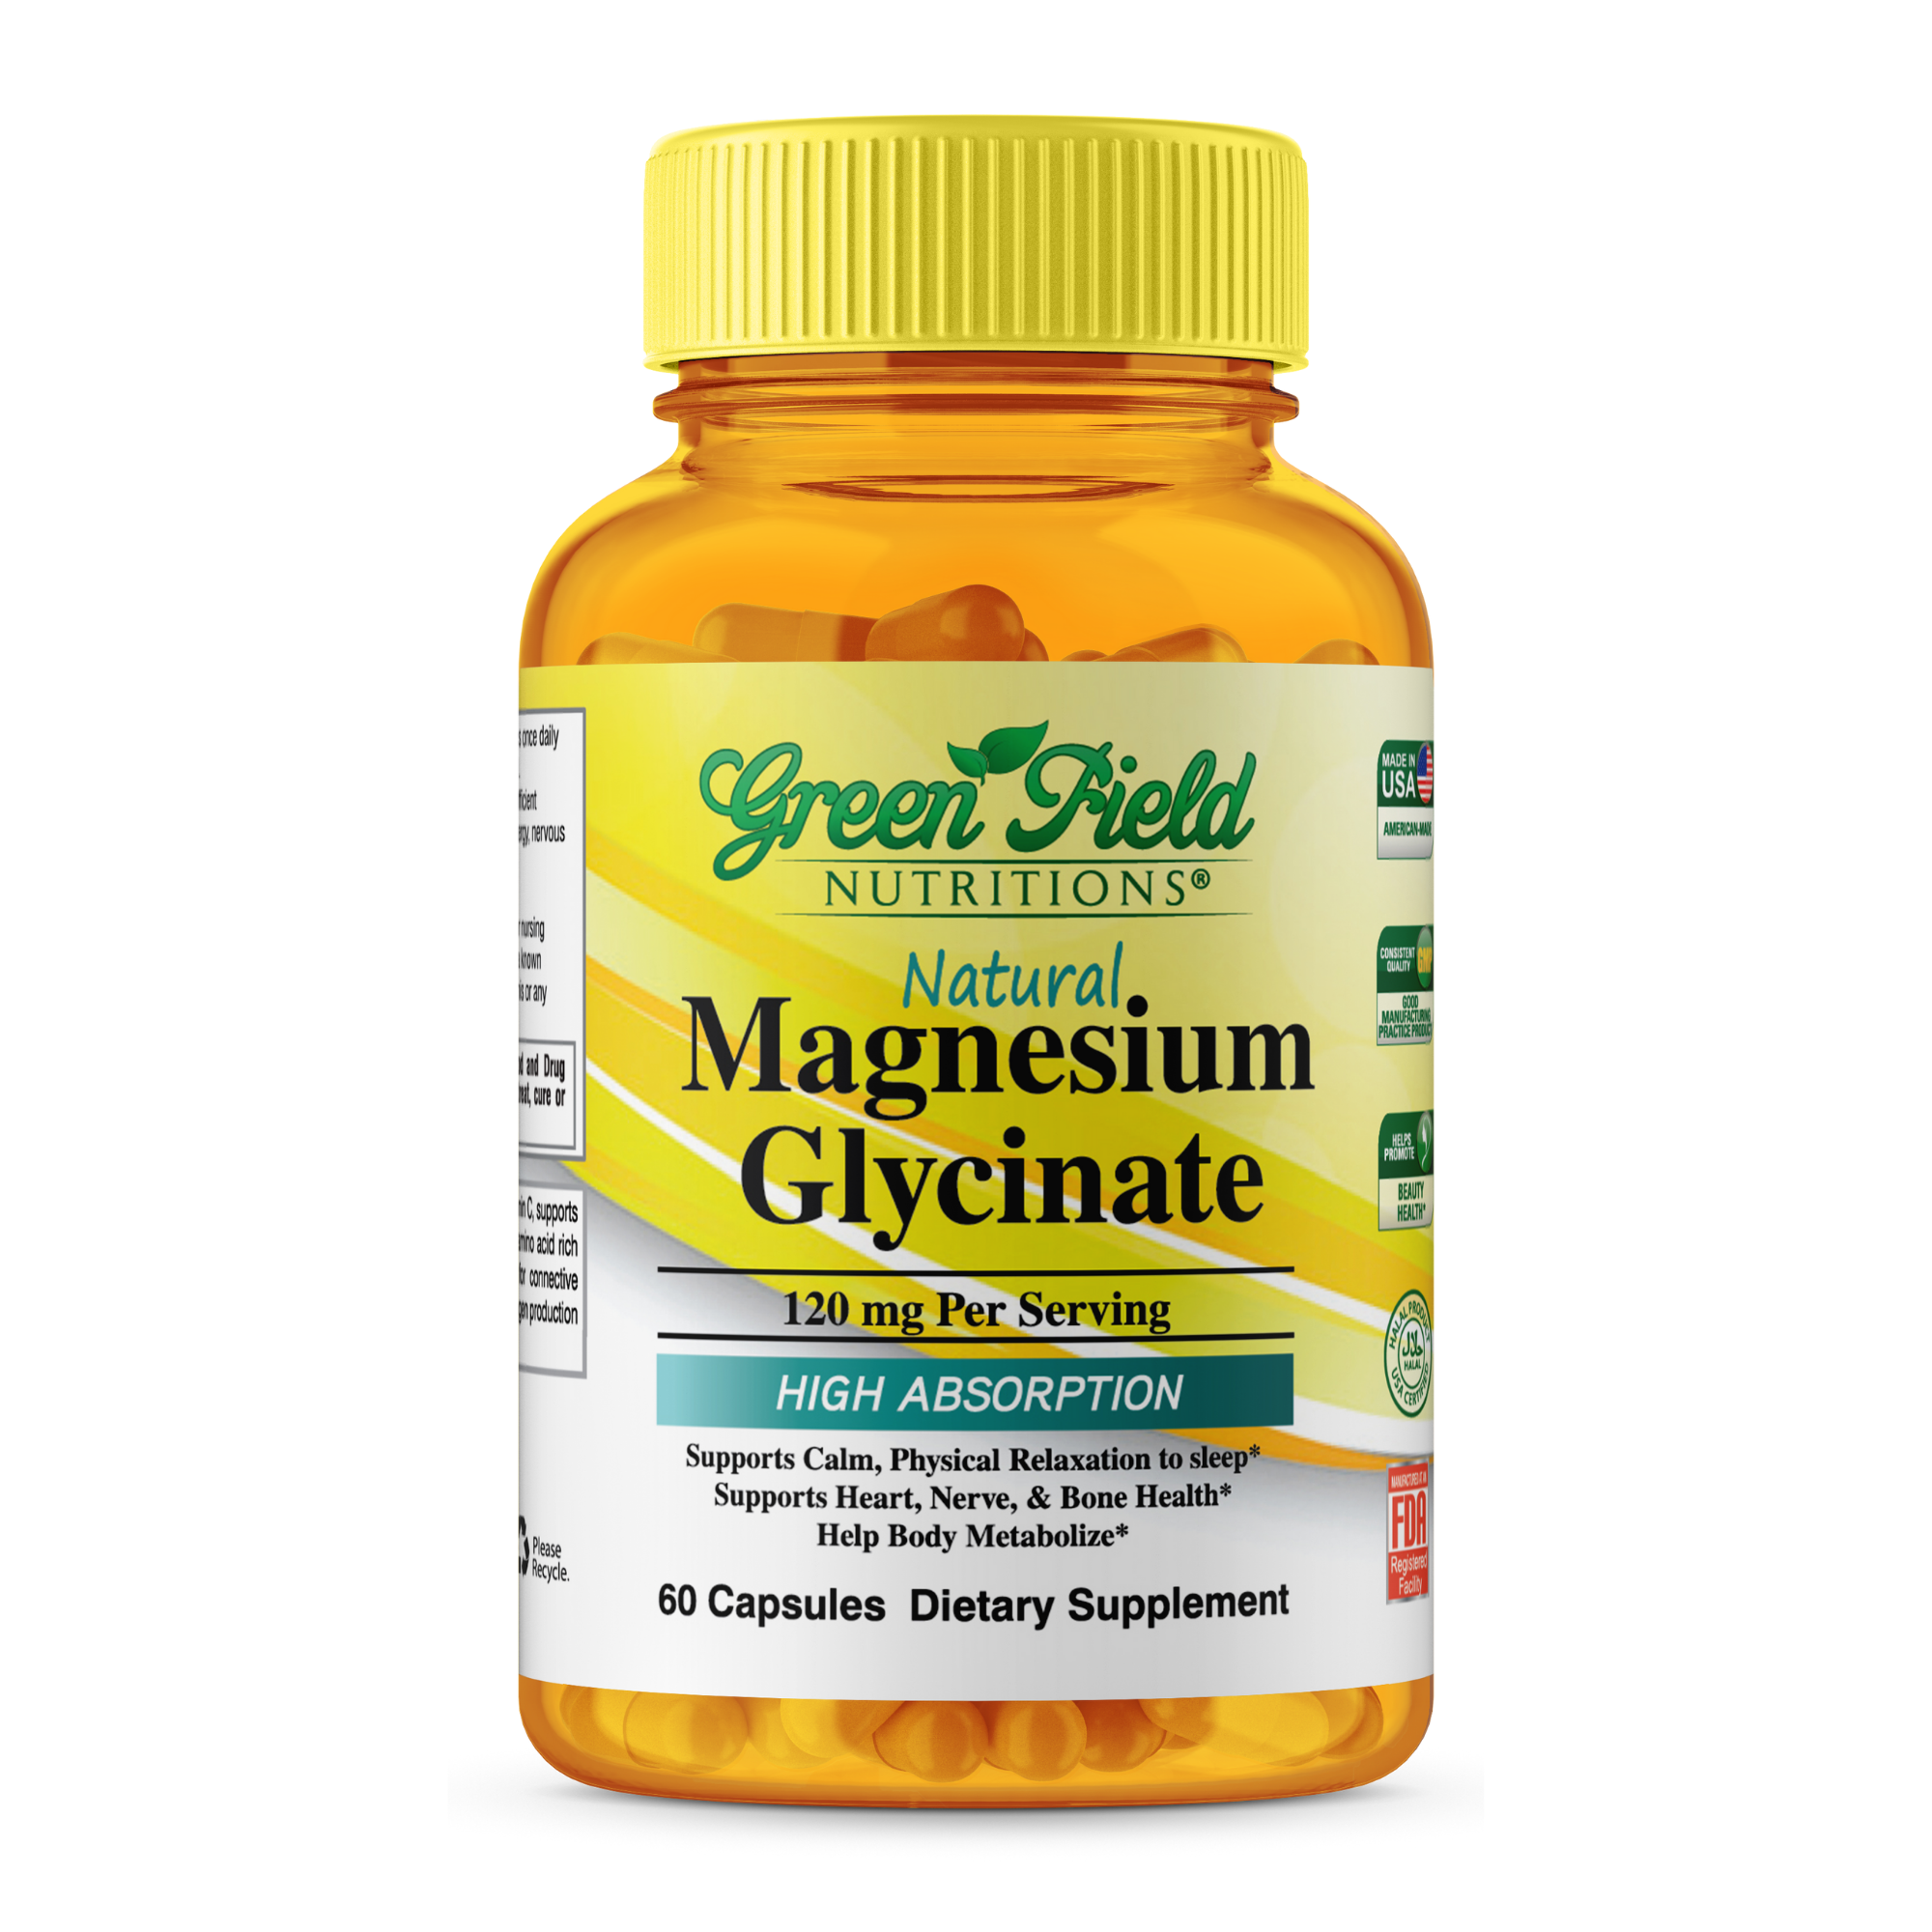 Greenfield Nutritions - Halal Magnesium Glycinate 120mg, Supports Calm, Nerve, Heart and Muscle Relaxation 60 Capsules, Halal Vitamins